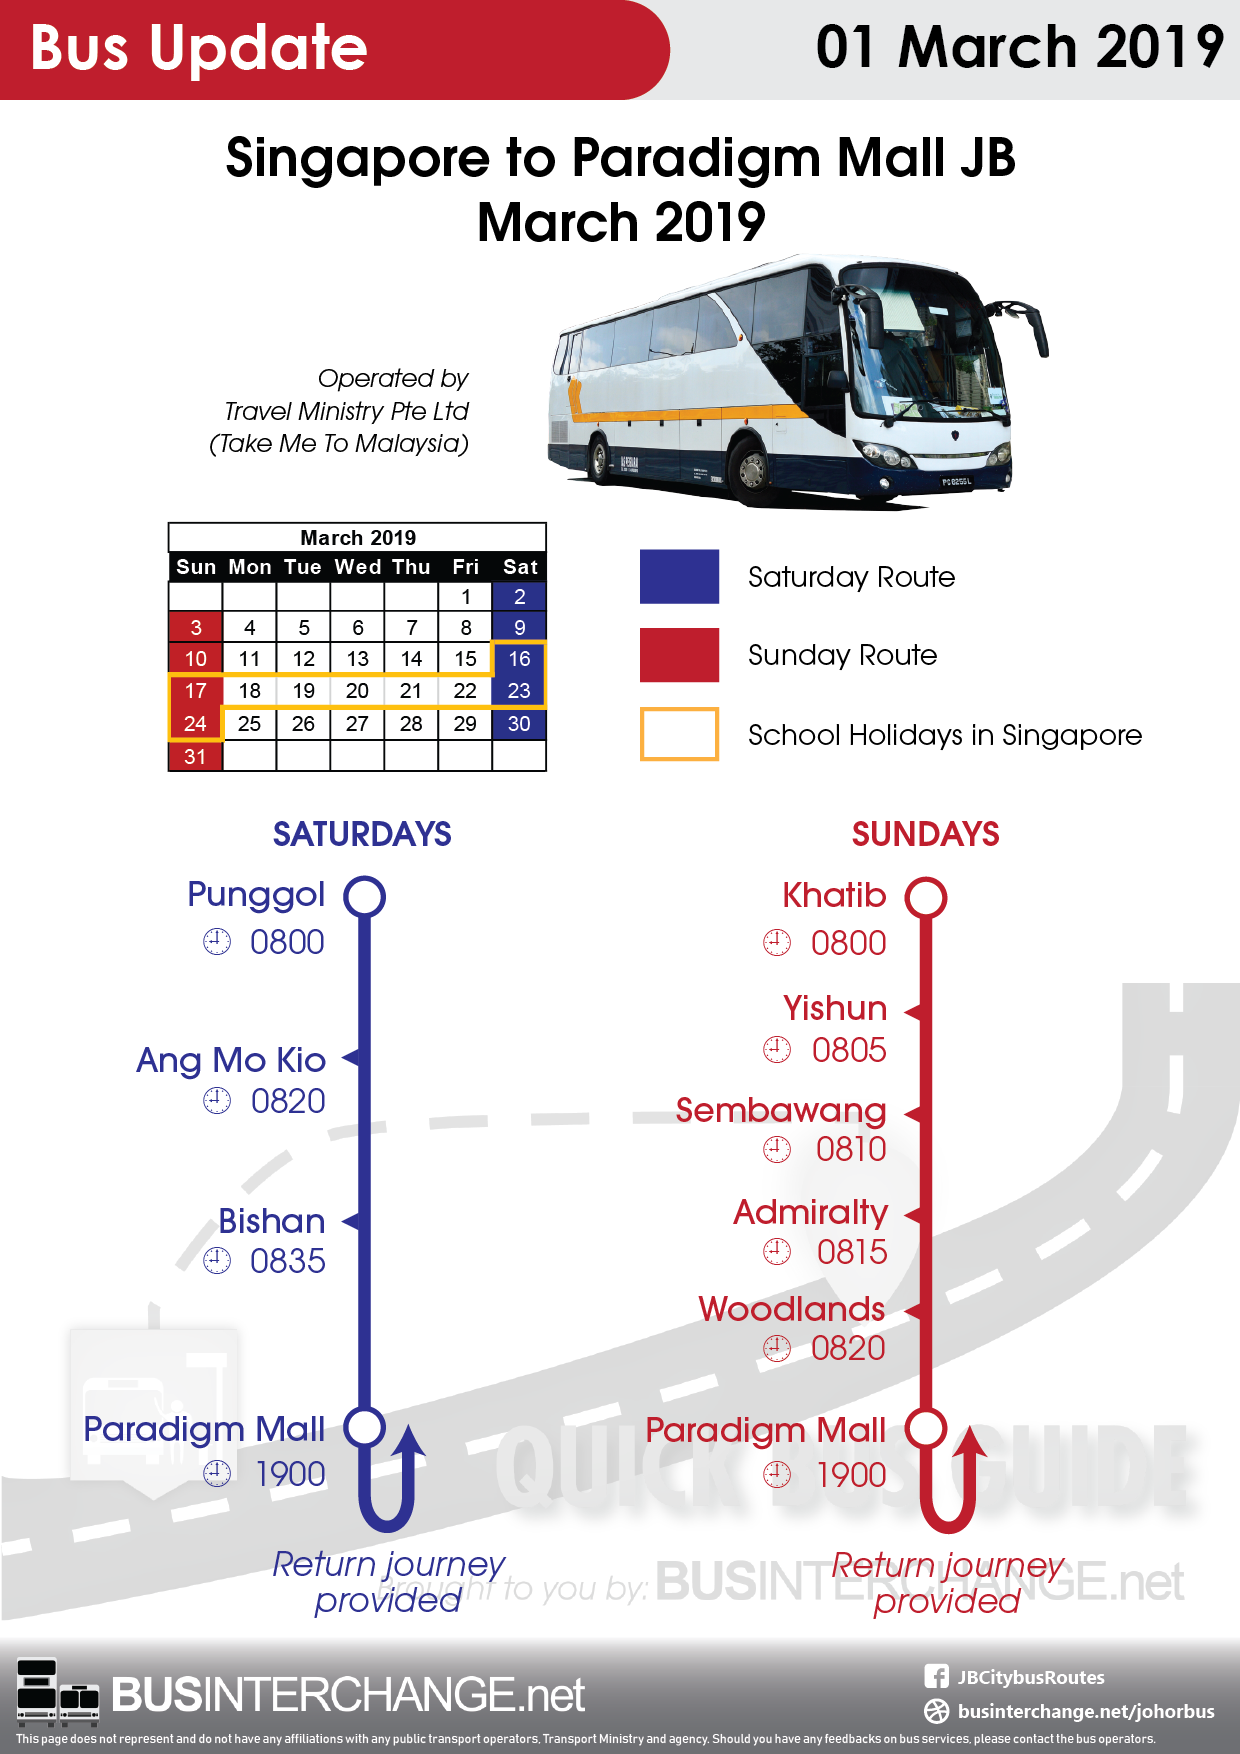 Bus routing from Singapore to Paradigm Mall in March 2019.